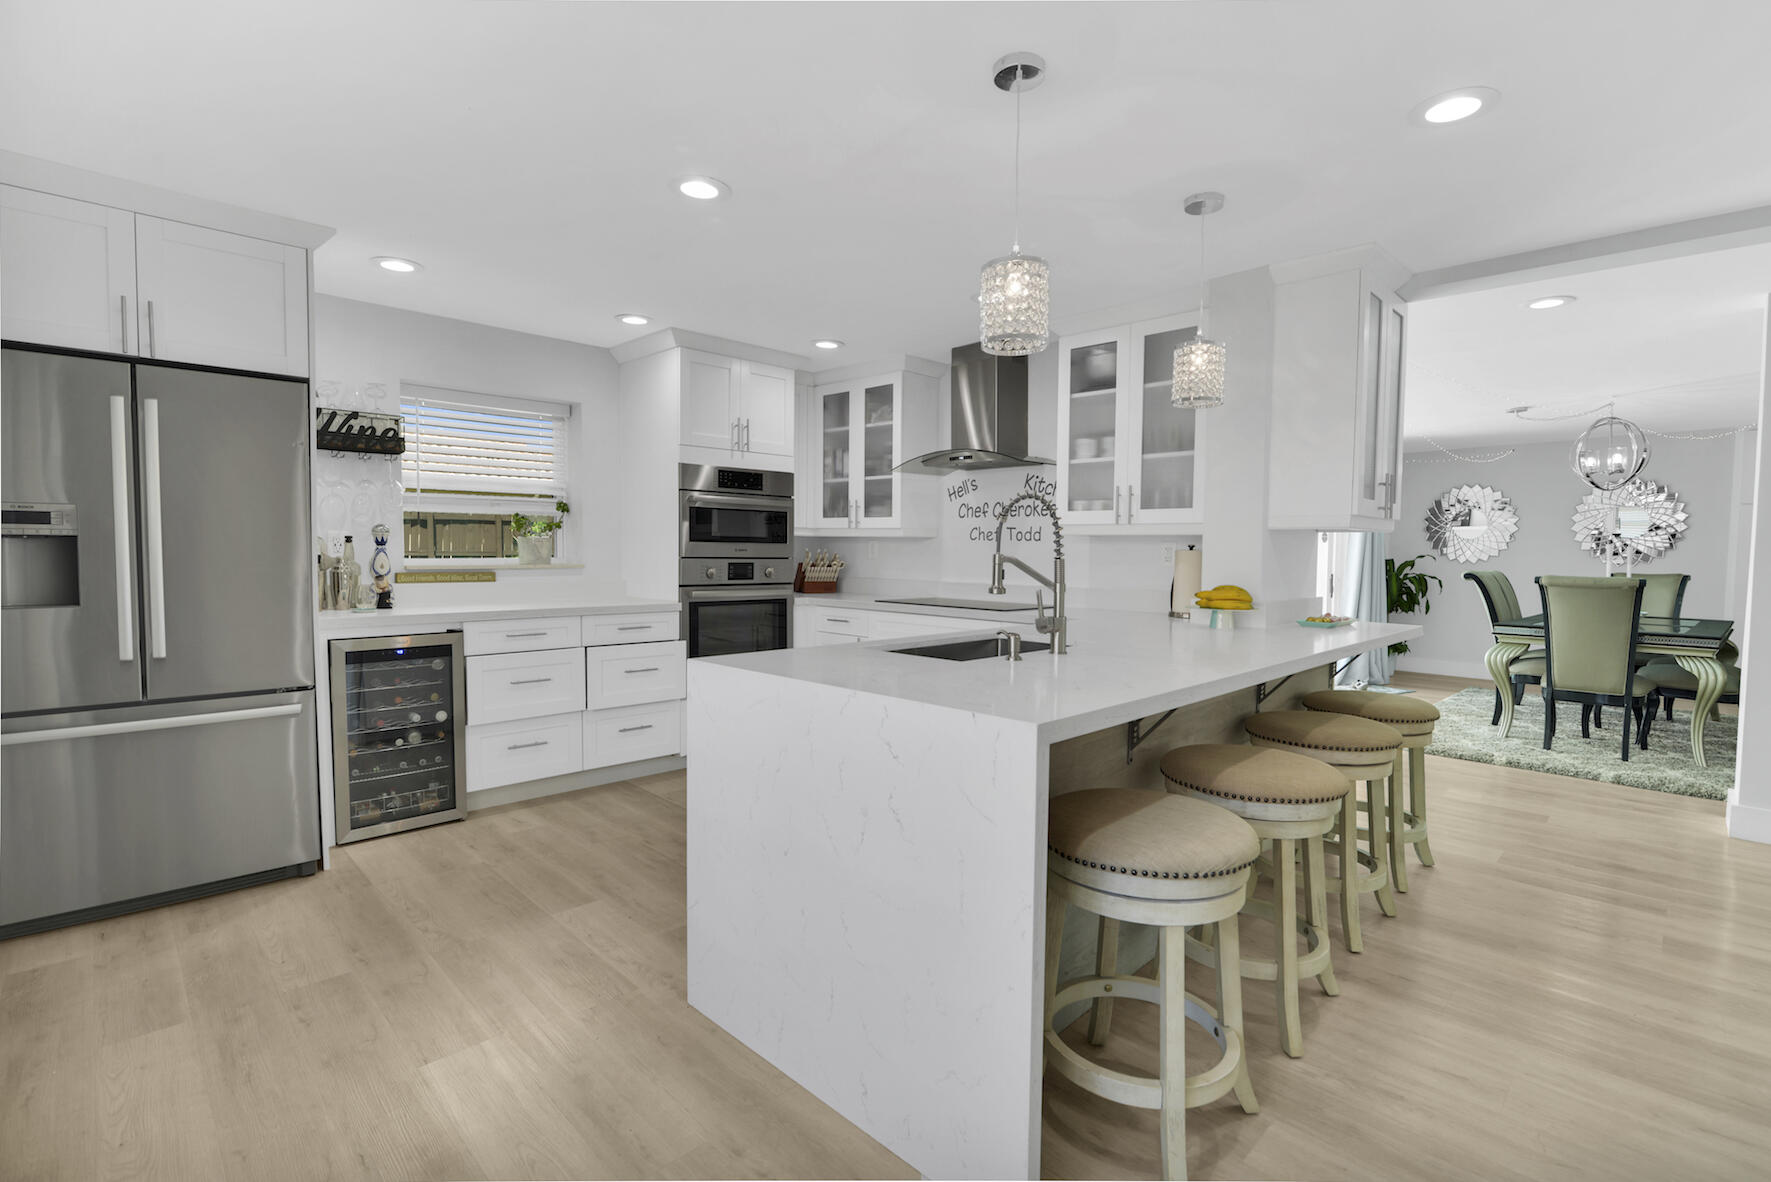 a kitchen with stainless steel appliances kitchen island granite countertop a dining table chairs and refrigerator